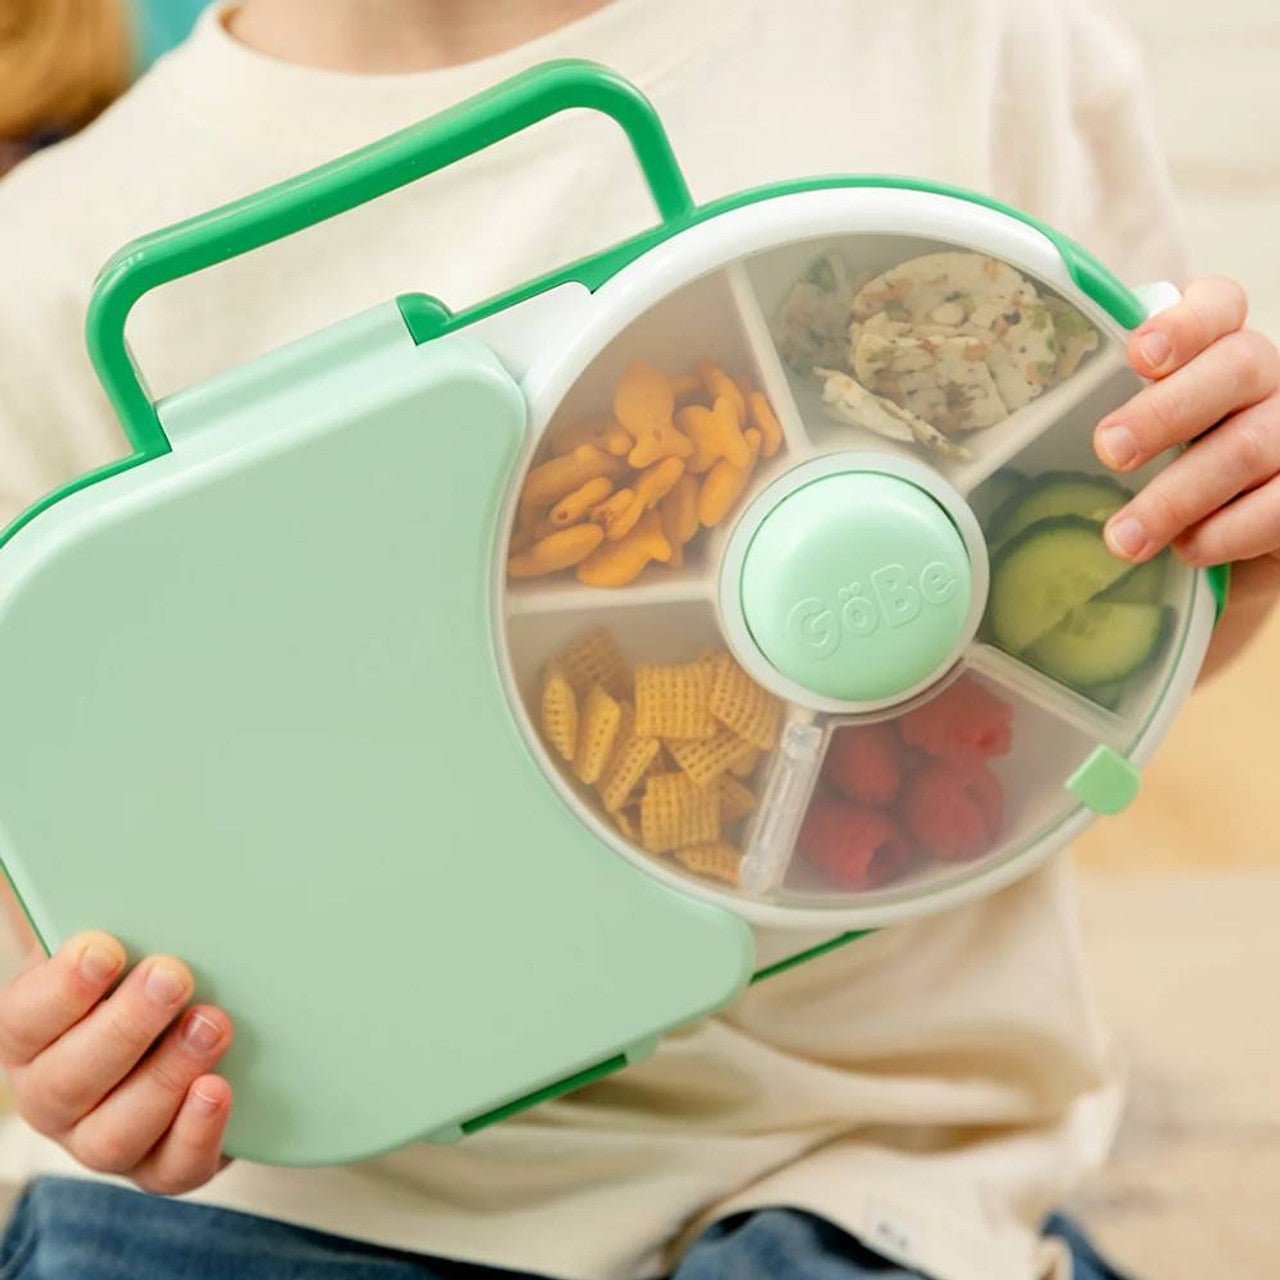 GoBe Kids Snack Container Snack Spinner (Large) - Reusable Bento Style  Divided Snack Containers for Lunch, Travel, On The Go